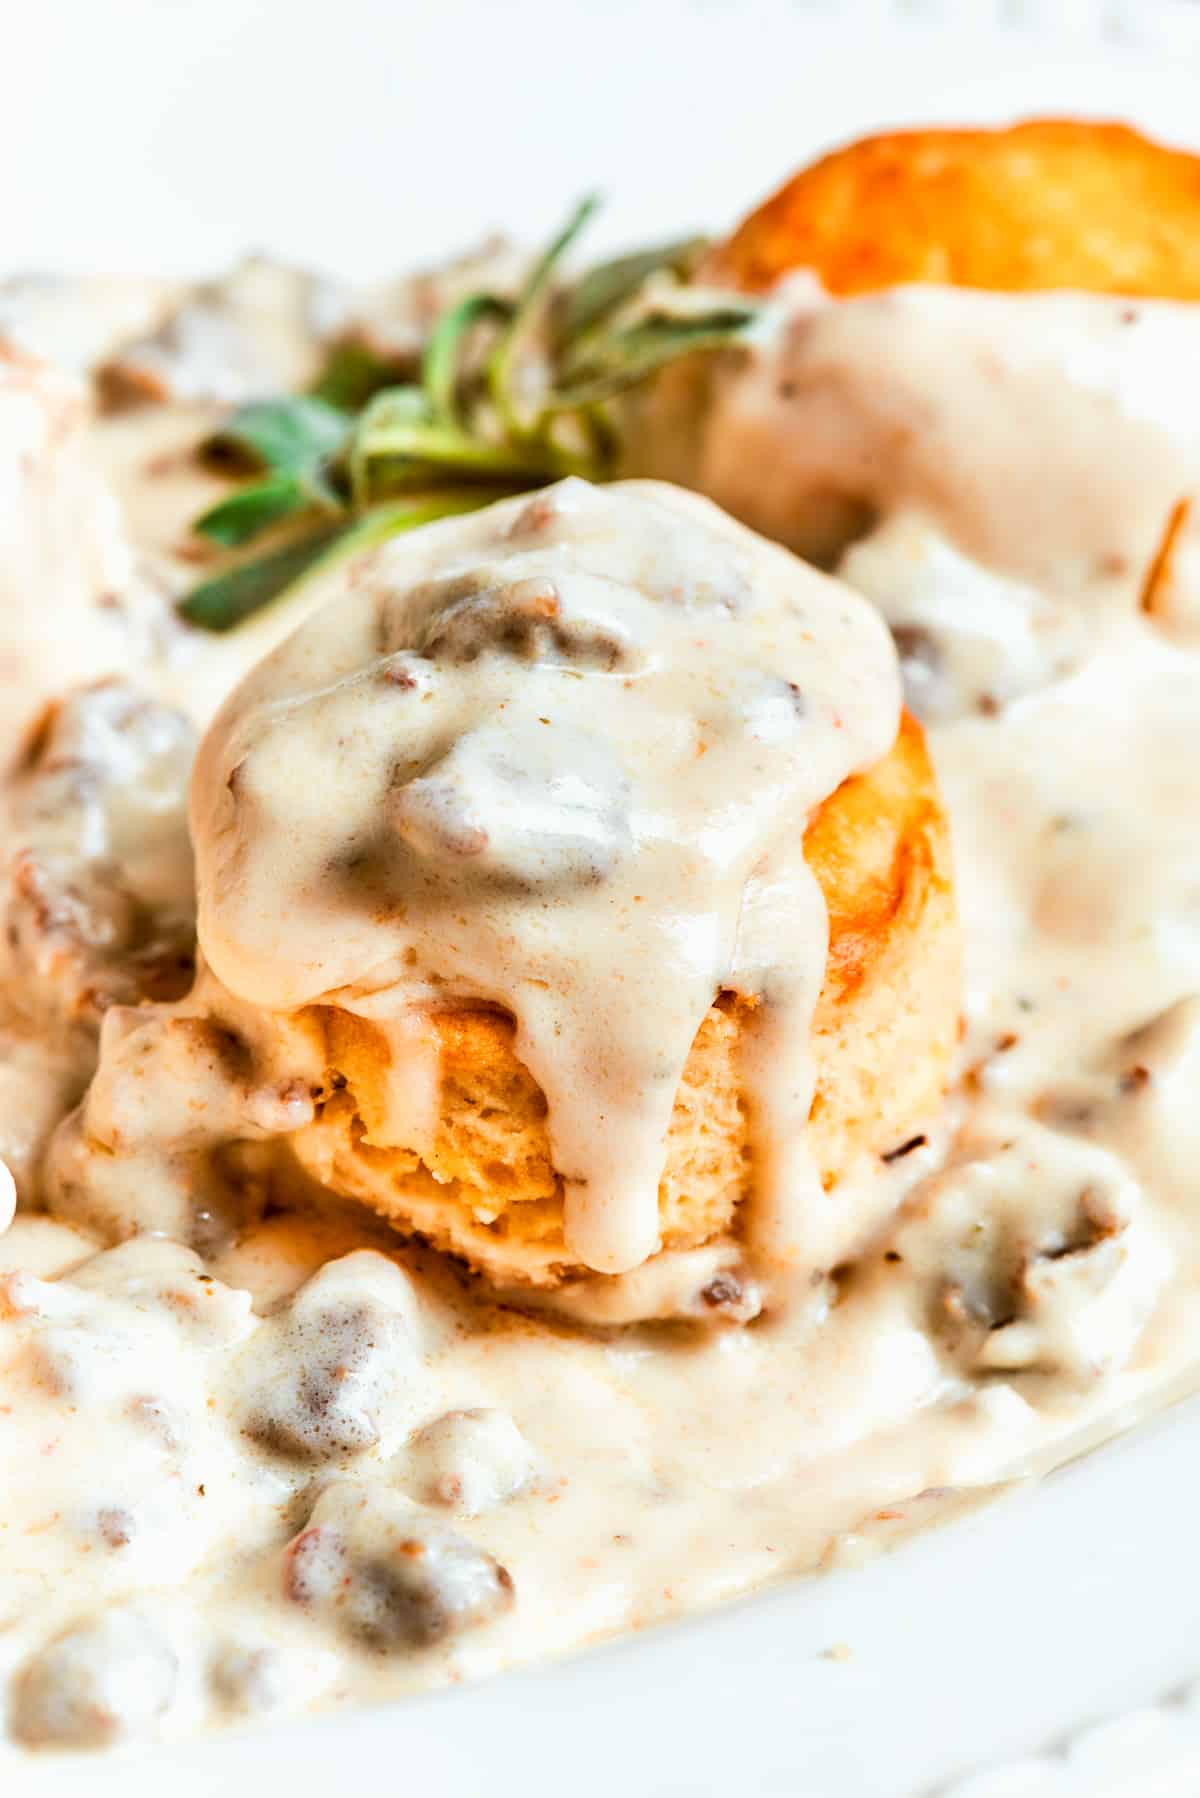 Sausage gravy poured over biscuits.